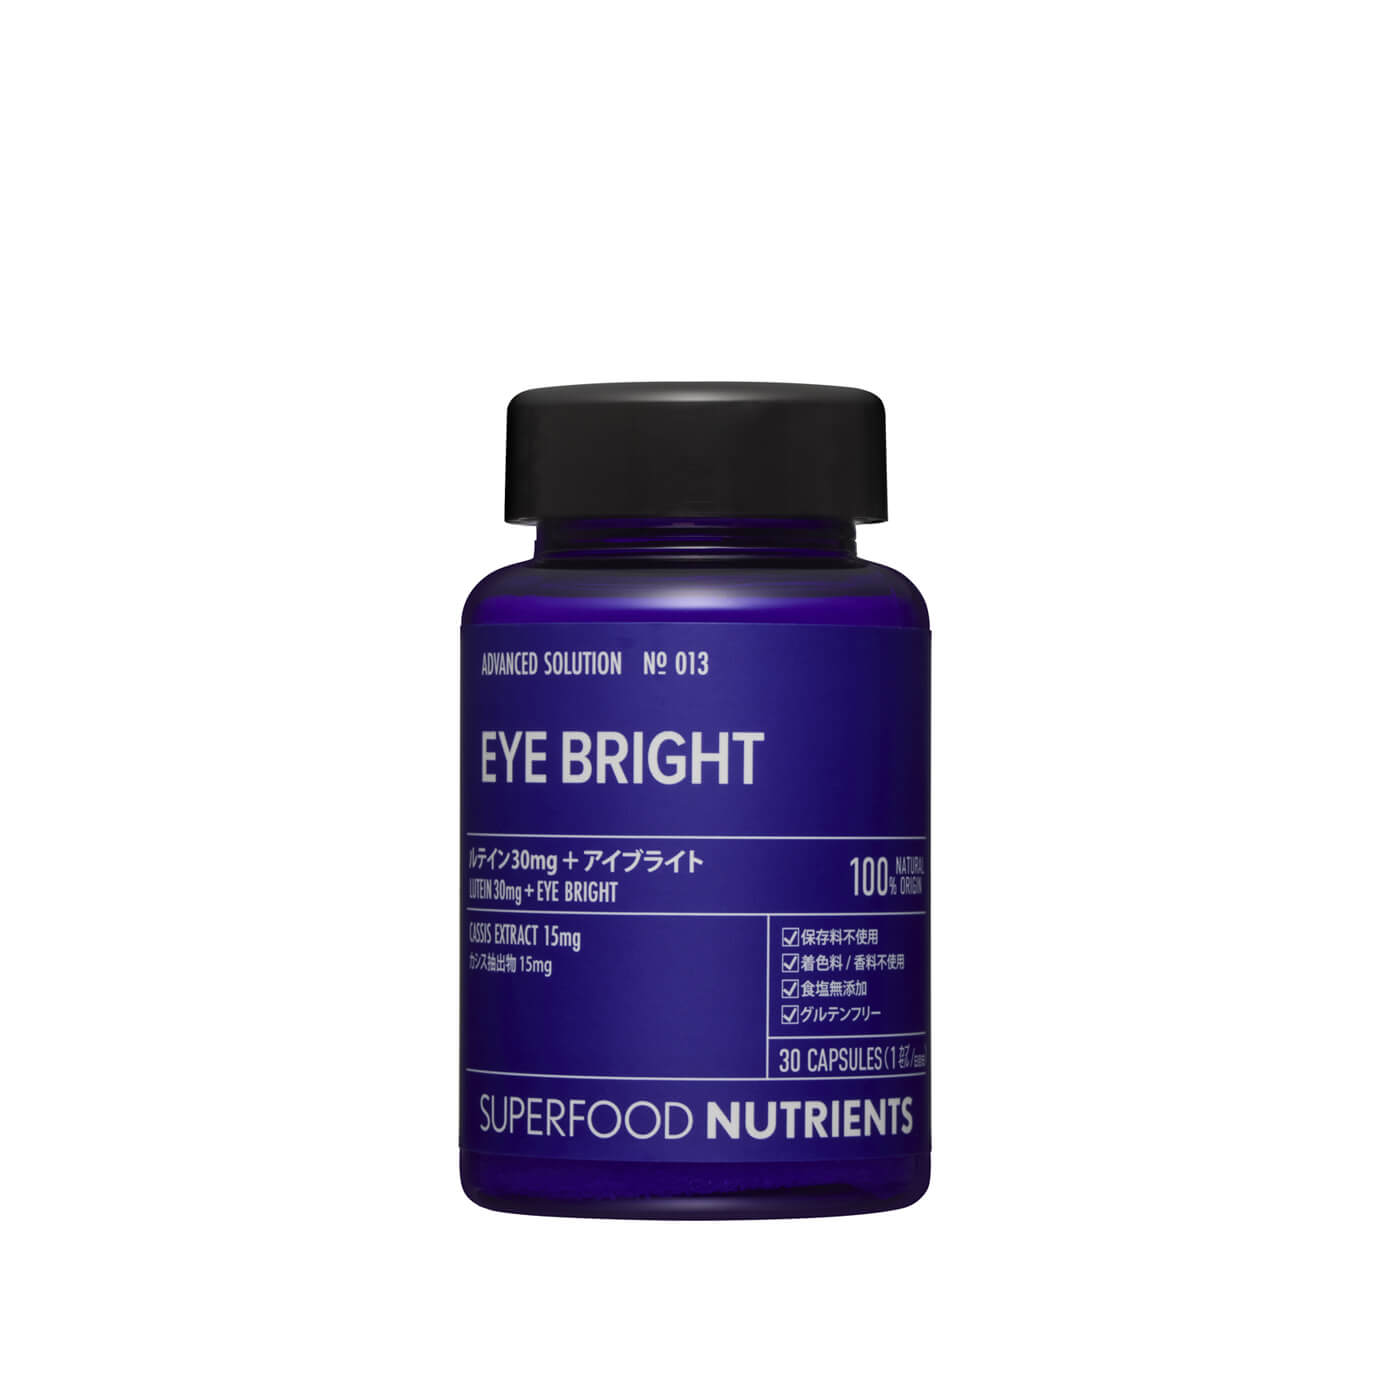 SUPERFOOD NUTRIENTS No.013 / EYE BRIGHT